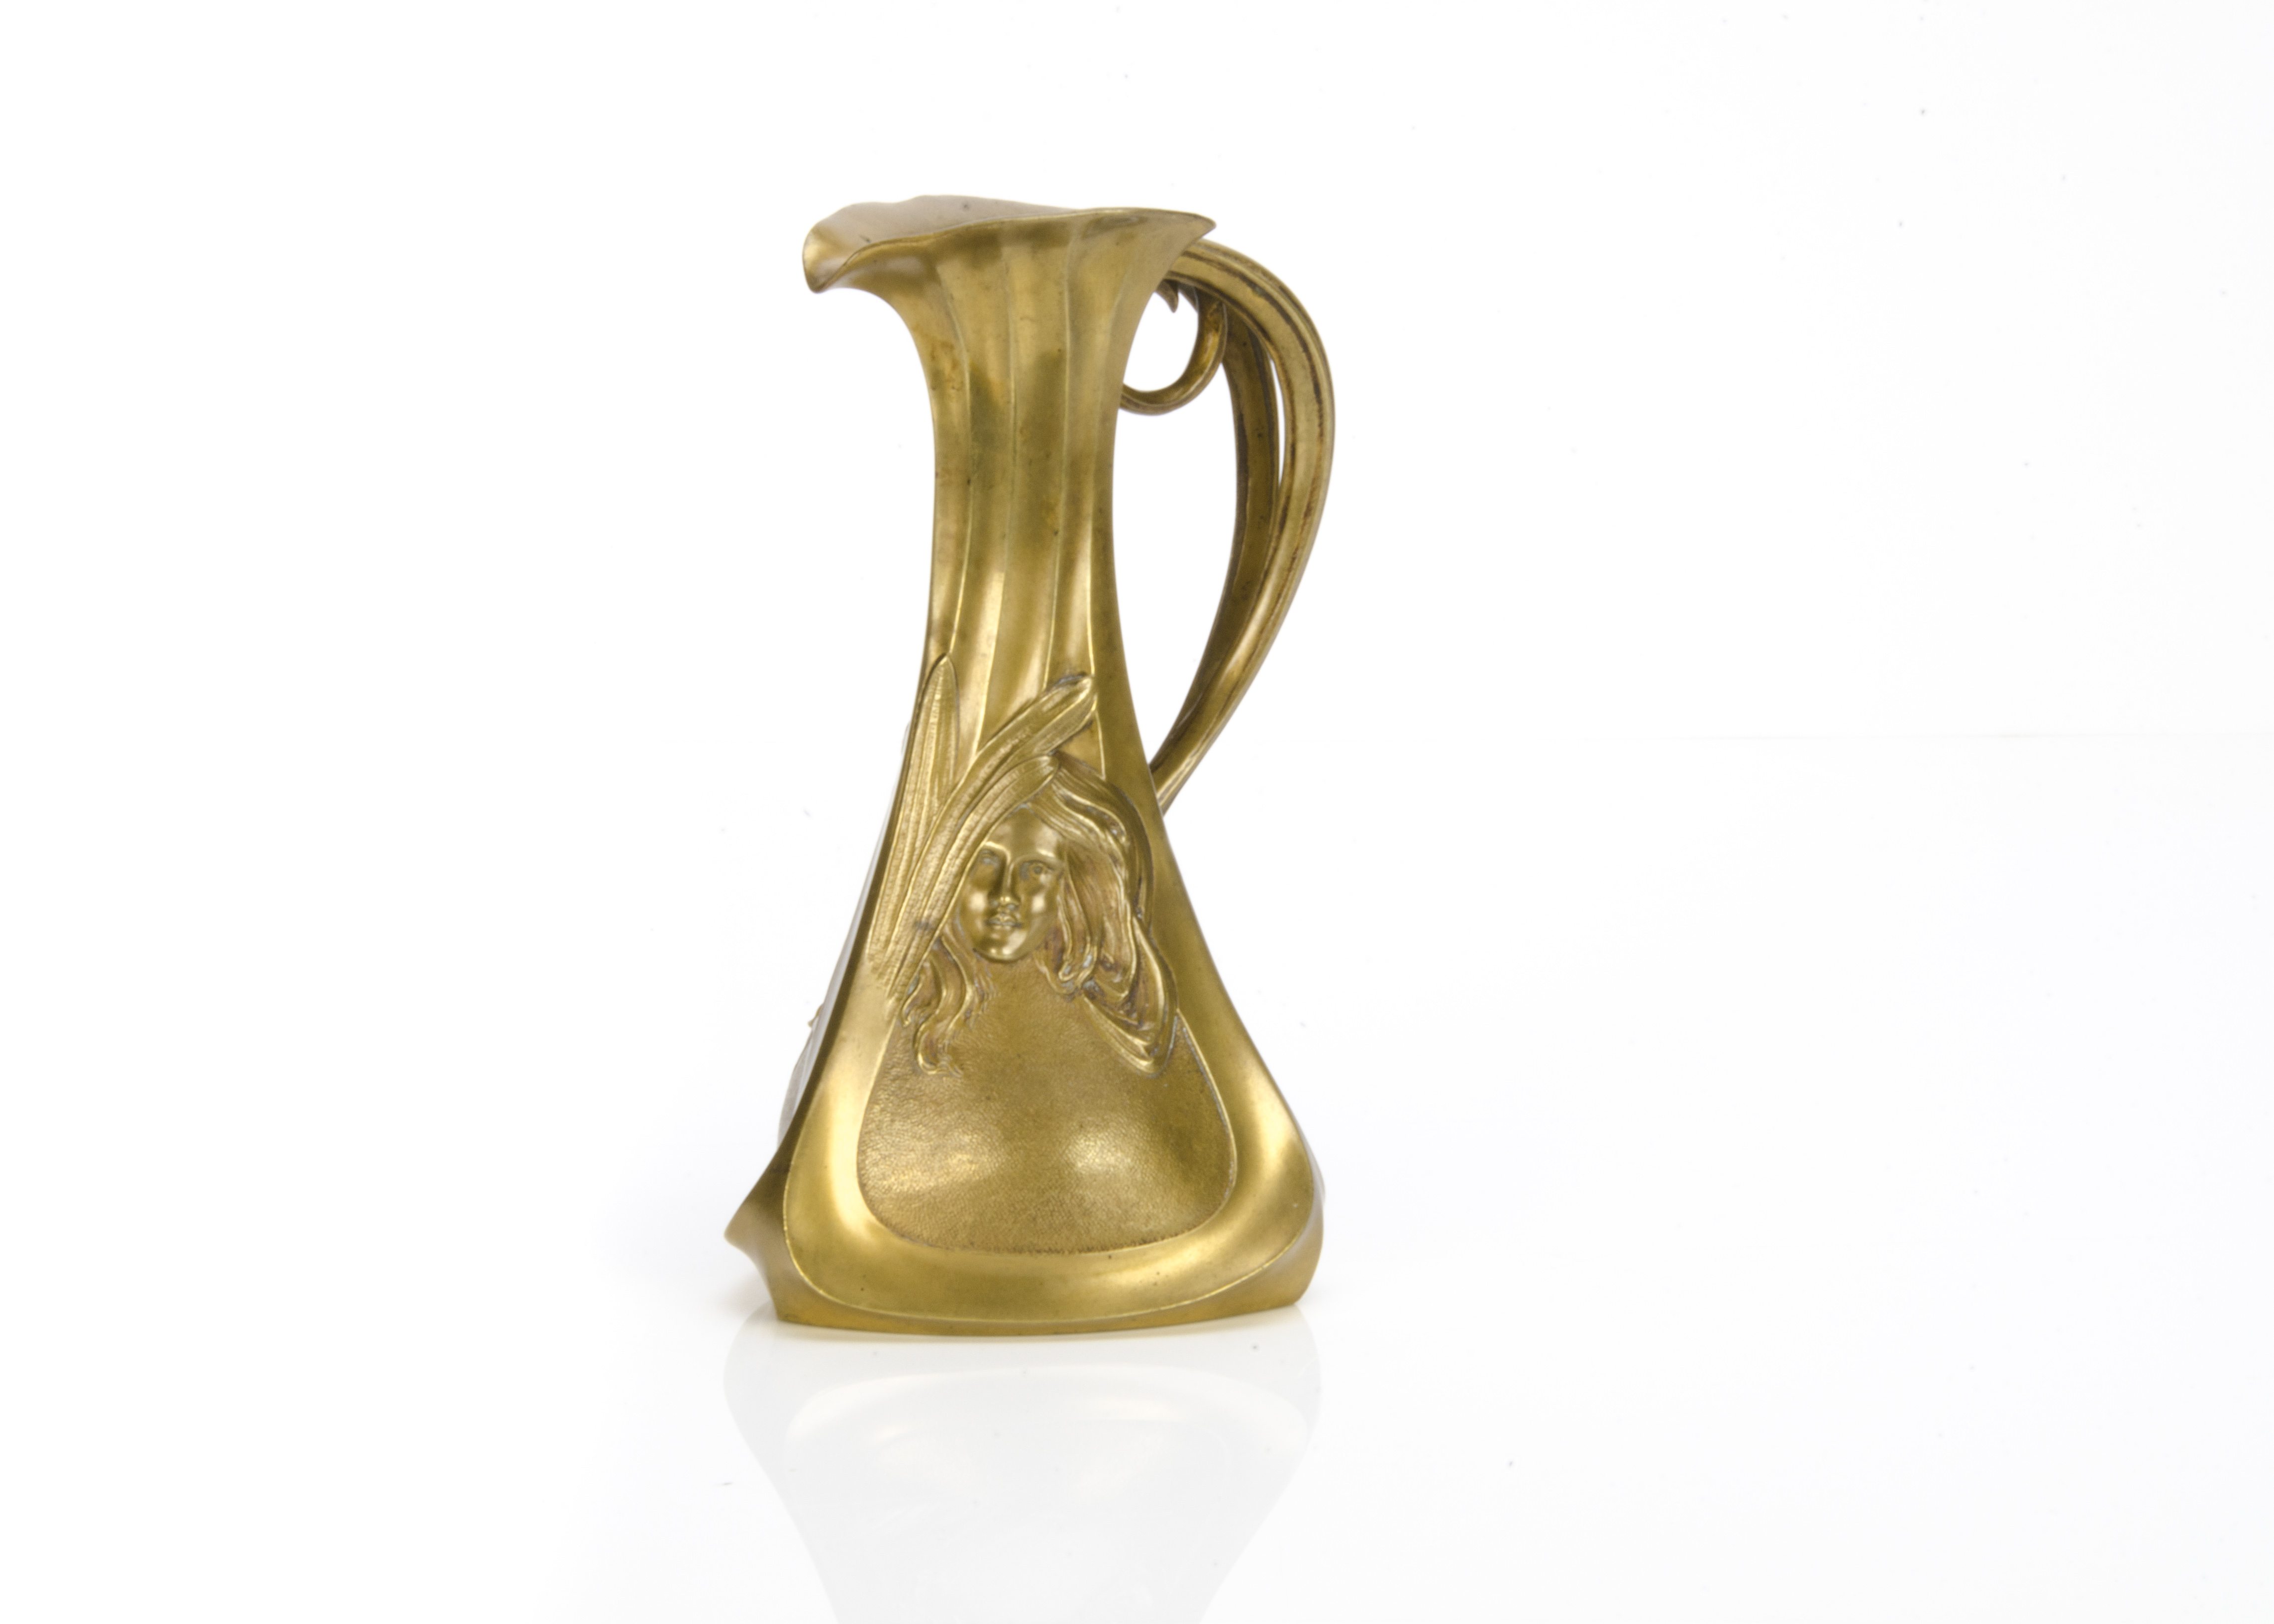 A French bronze Art Nouveau jug or pitcher, of triangular tapered form with the front two sides